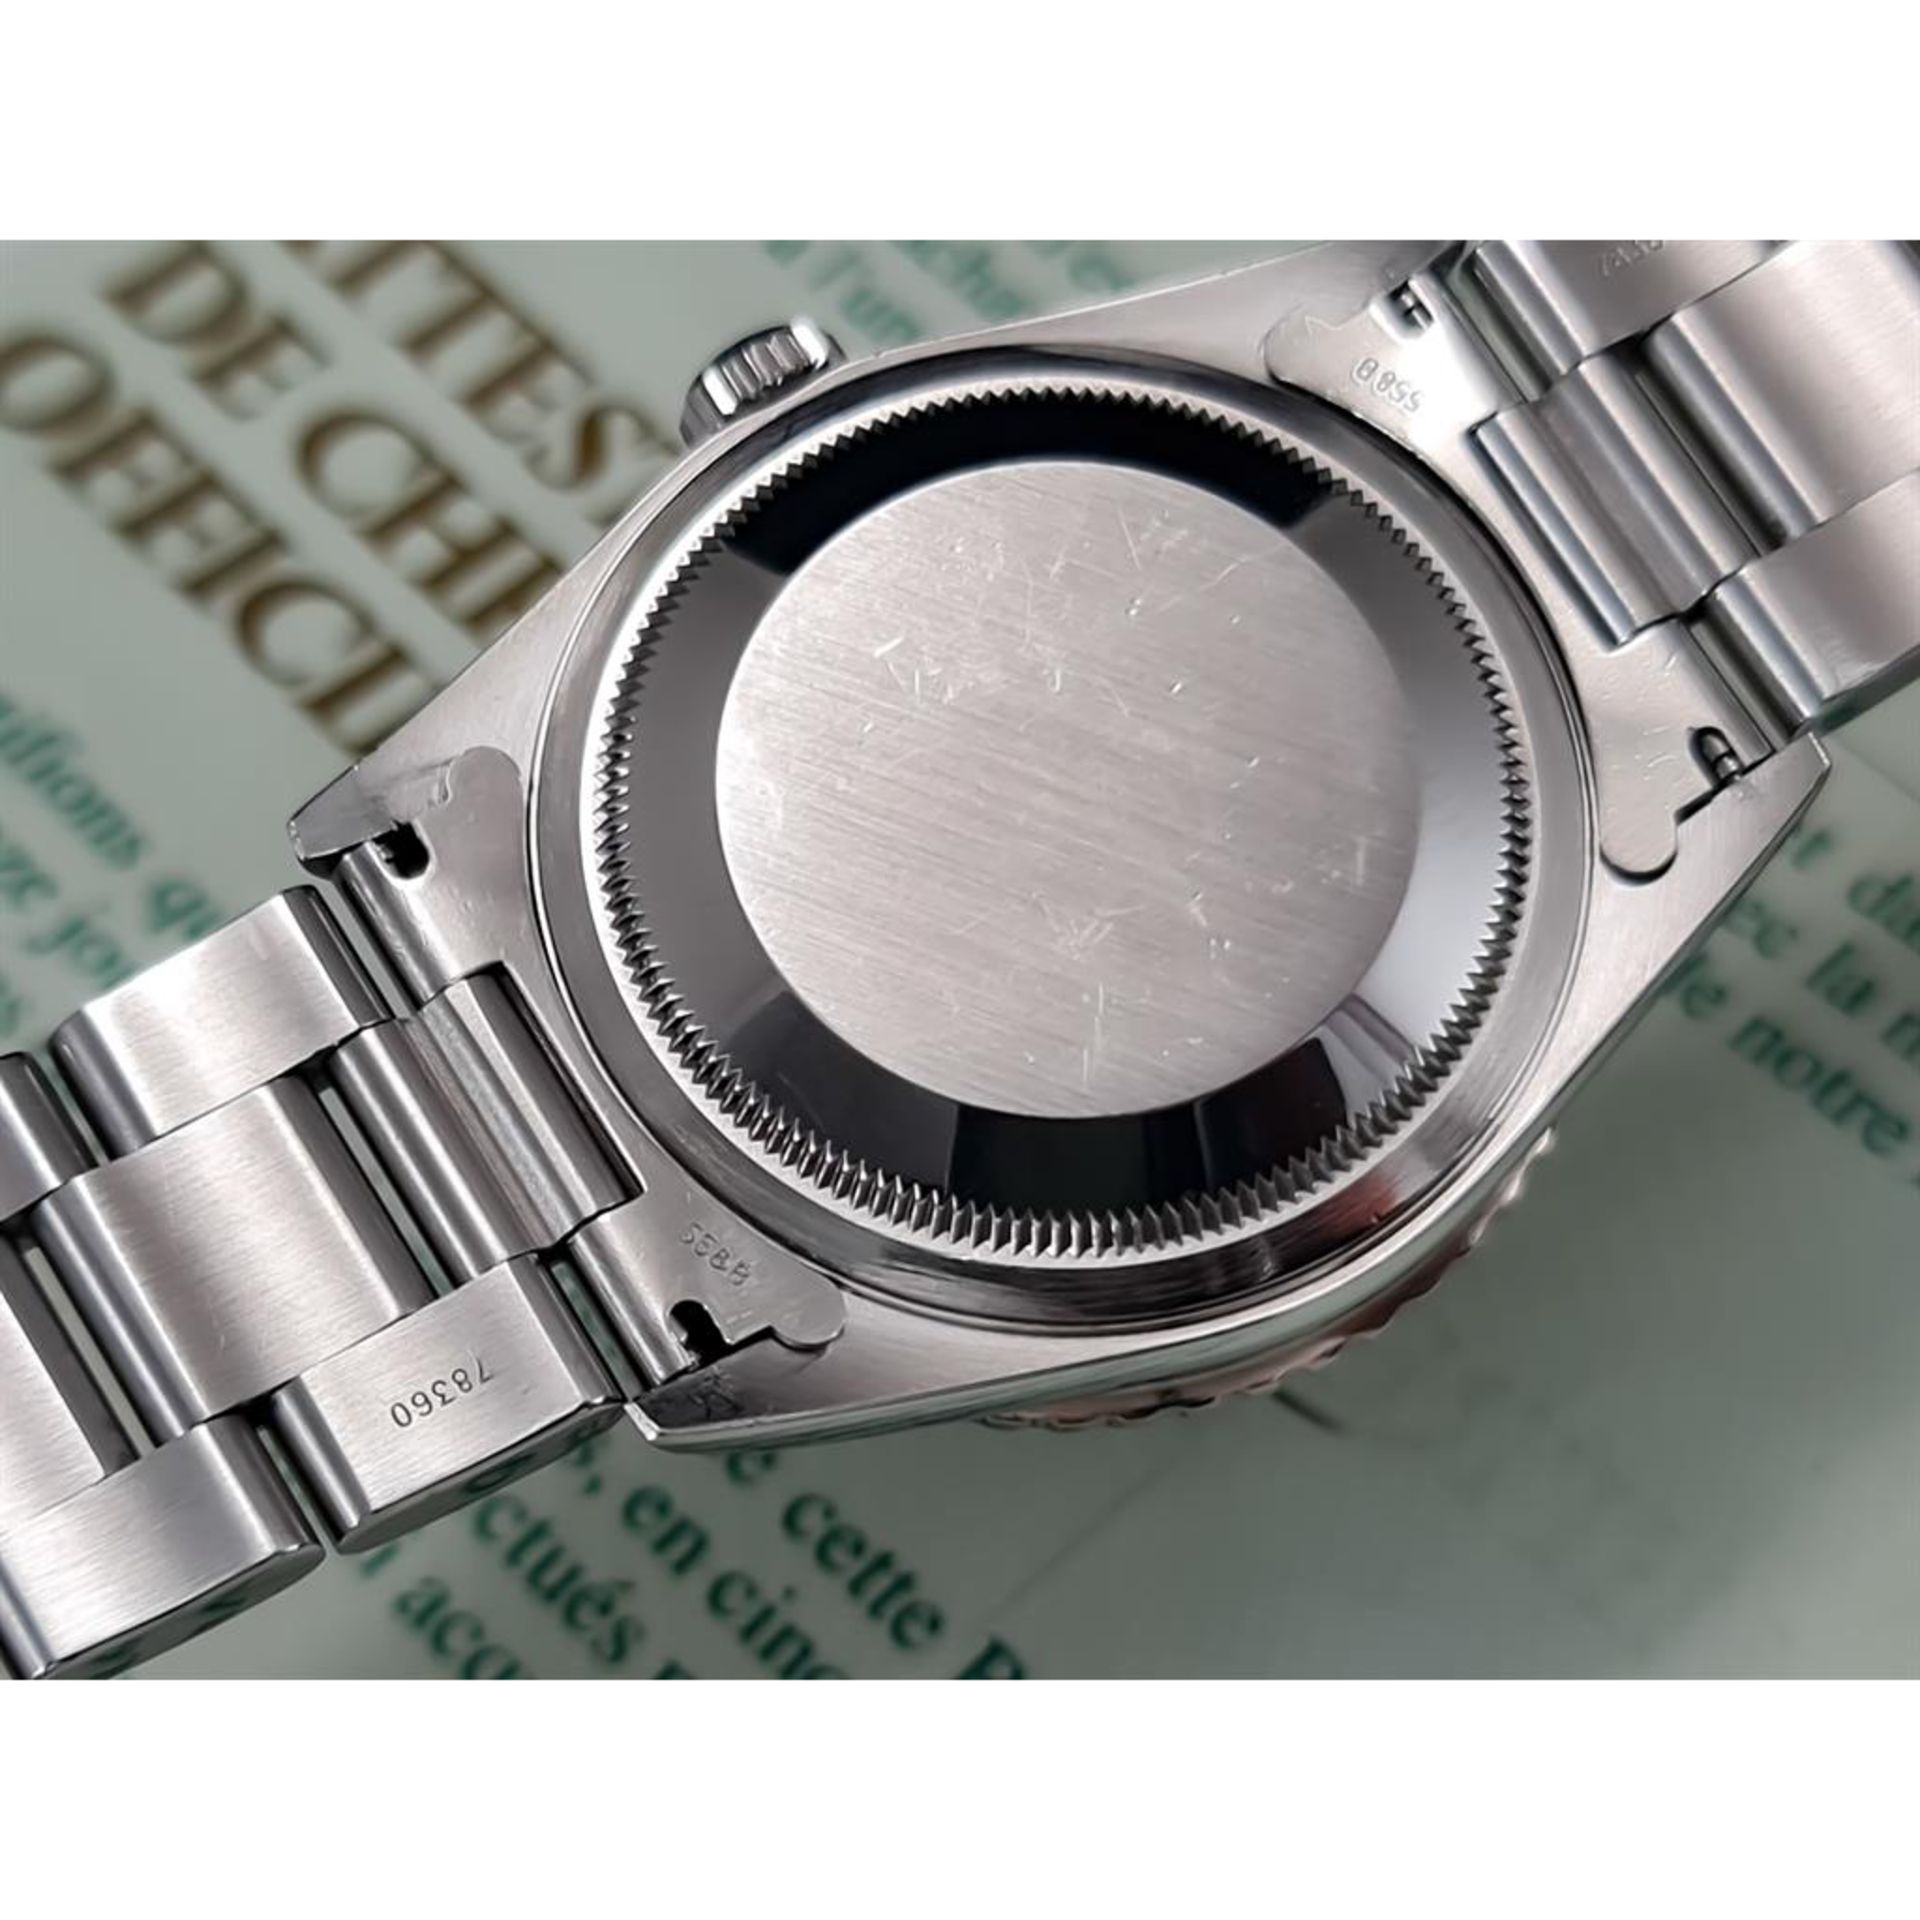 1999 Rolex Datejust Turn-O-Graph 16264 Steel White Gold - Black Dial - Oyster - Image 10 of 11